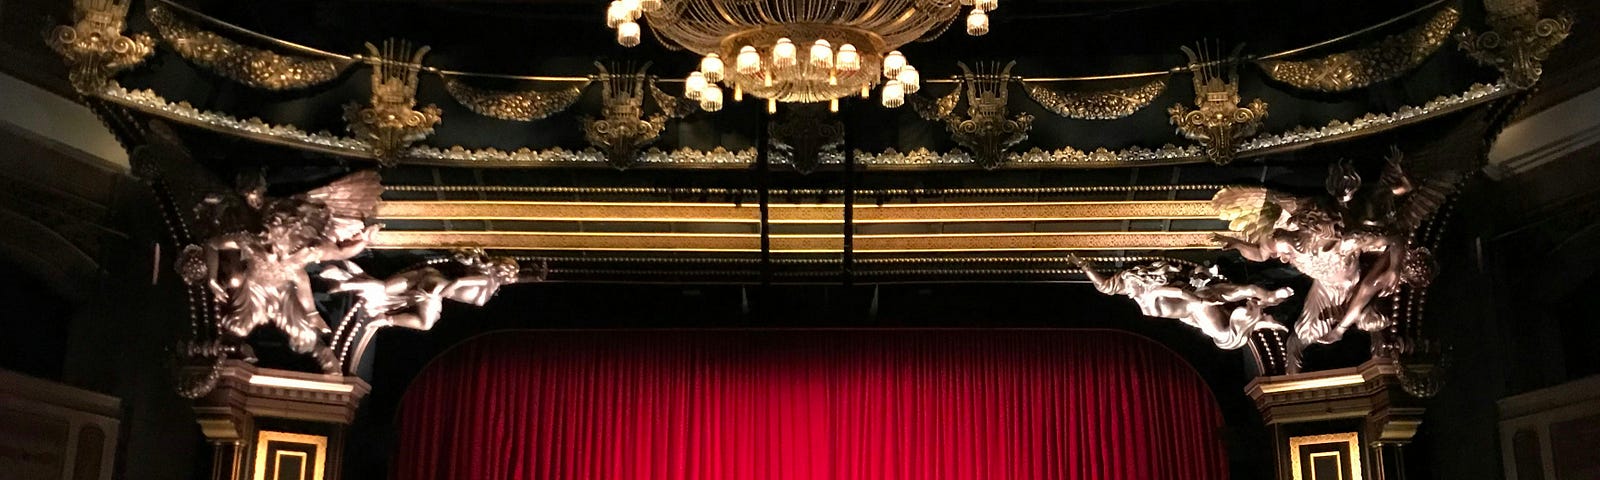 The red velvet curtains are closed over an ornate cinema screen